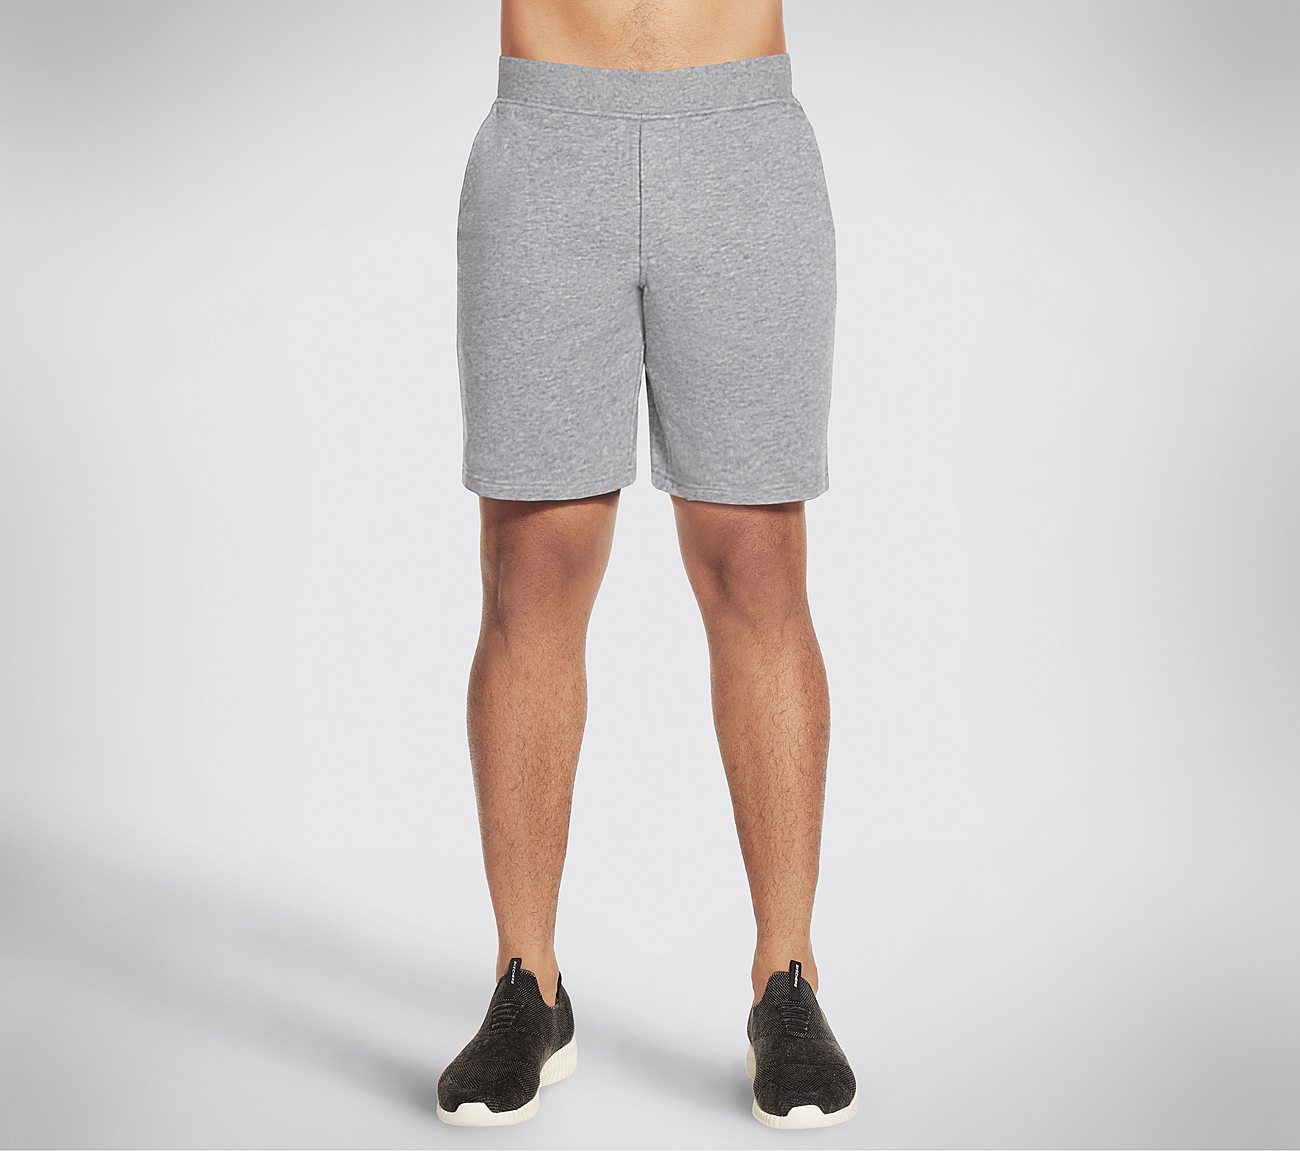 EXPLORER 9IN SHORT, LIGHT GREY Apparel Lateral View